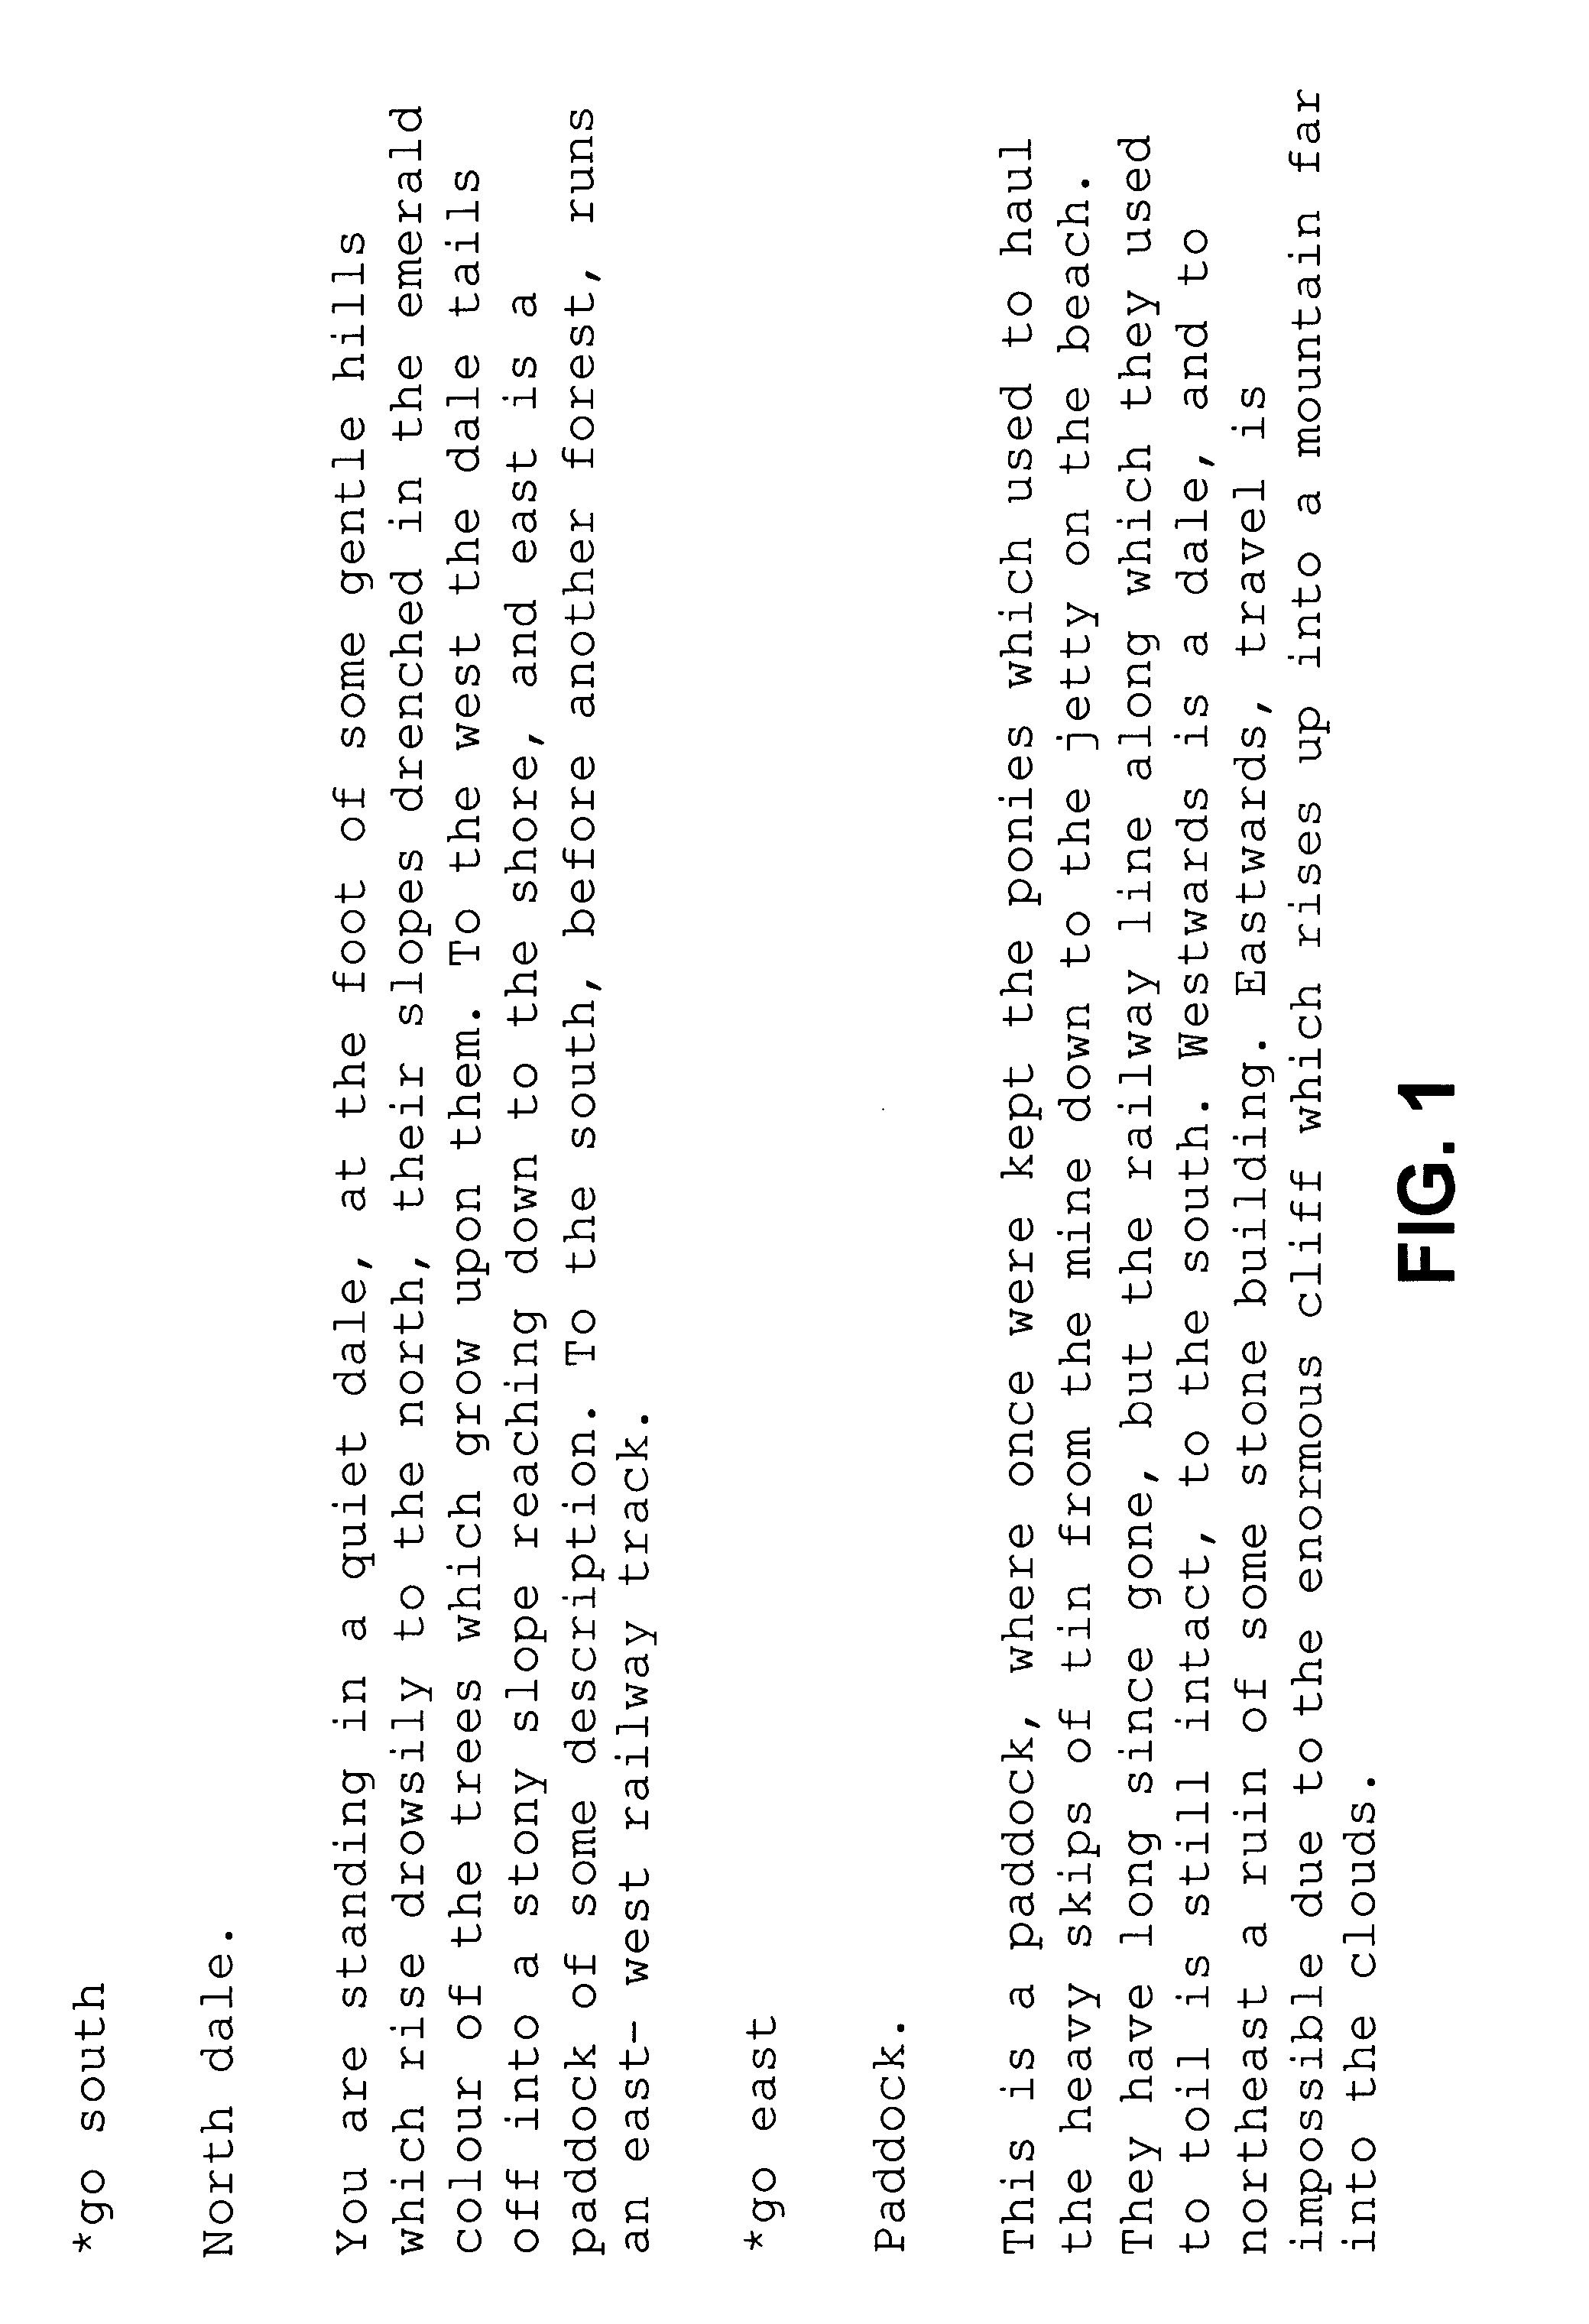 System and method for organizing online communities and virtual dwellings within a virtual environment